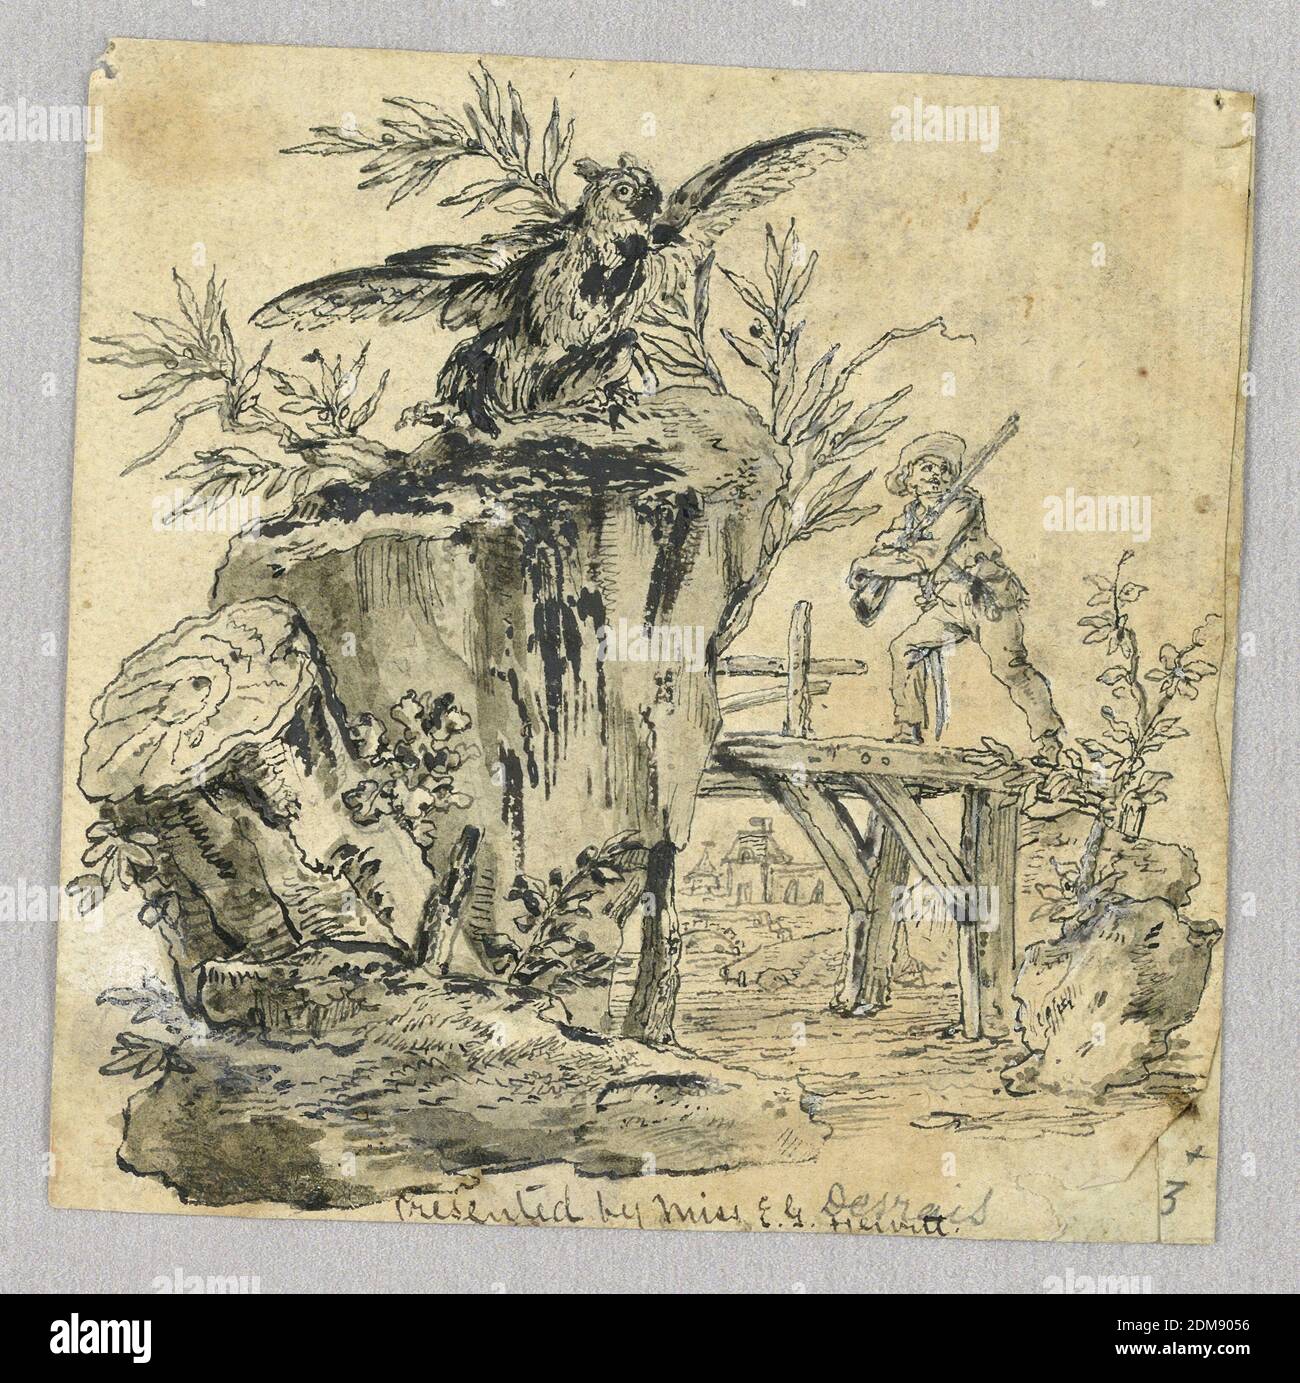 Owl and Figure in Landscape, Pen and ink, brush and gray wash on paper, brush and white gouache on paper, Owl with outstretched wings atop a tree stump in left foreground; figure with gun on wood bridge walking leftward at center right. In the background, town scene., Italy, 17th–19th century, Drawing Stock Photo